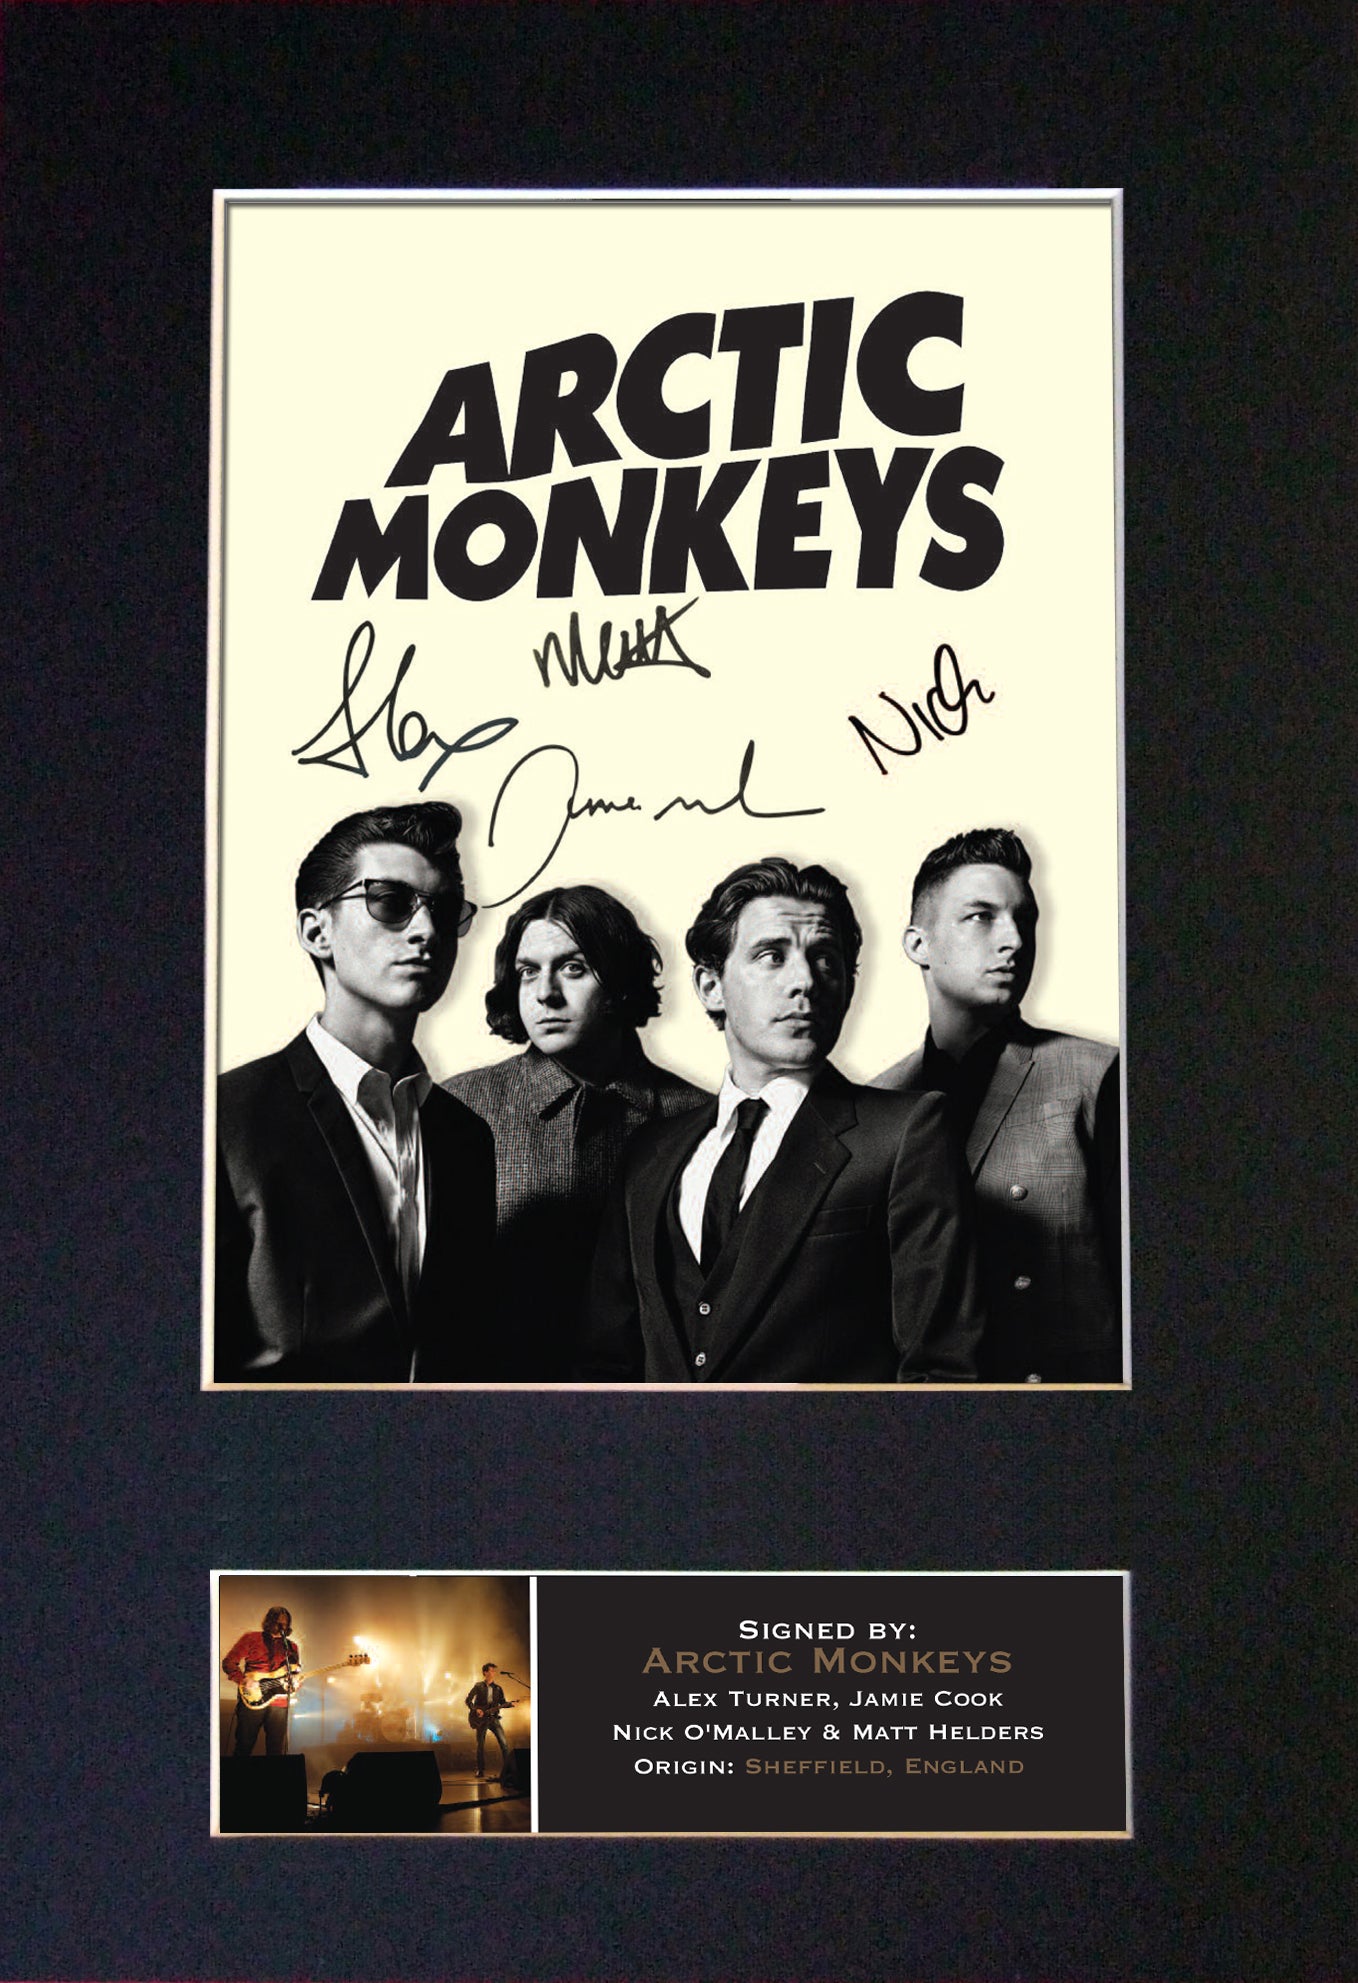 ARCTIC MONKEYS Autograph Mounted Signed Photo Reproduction Print A4 186